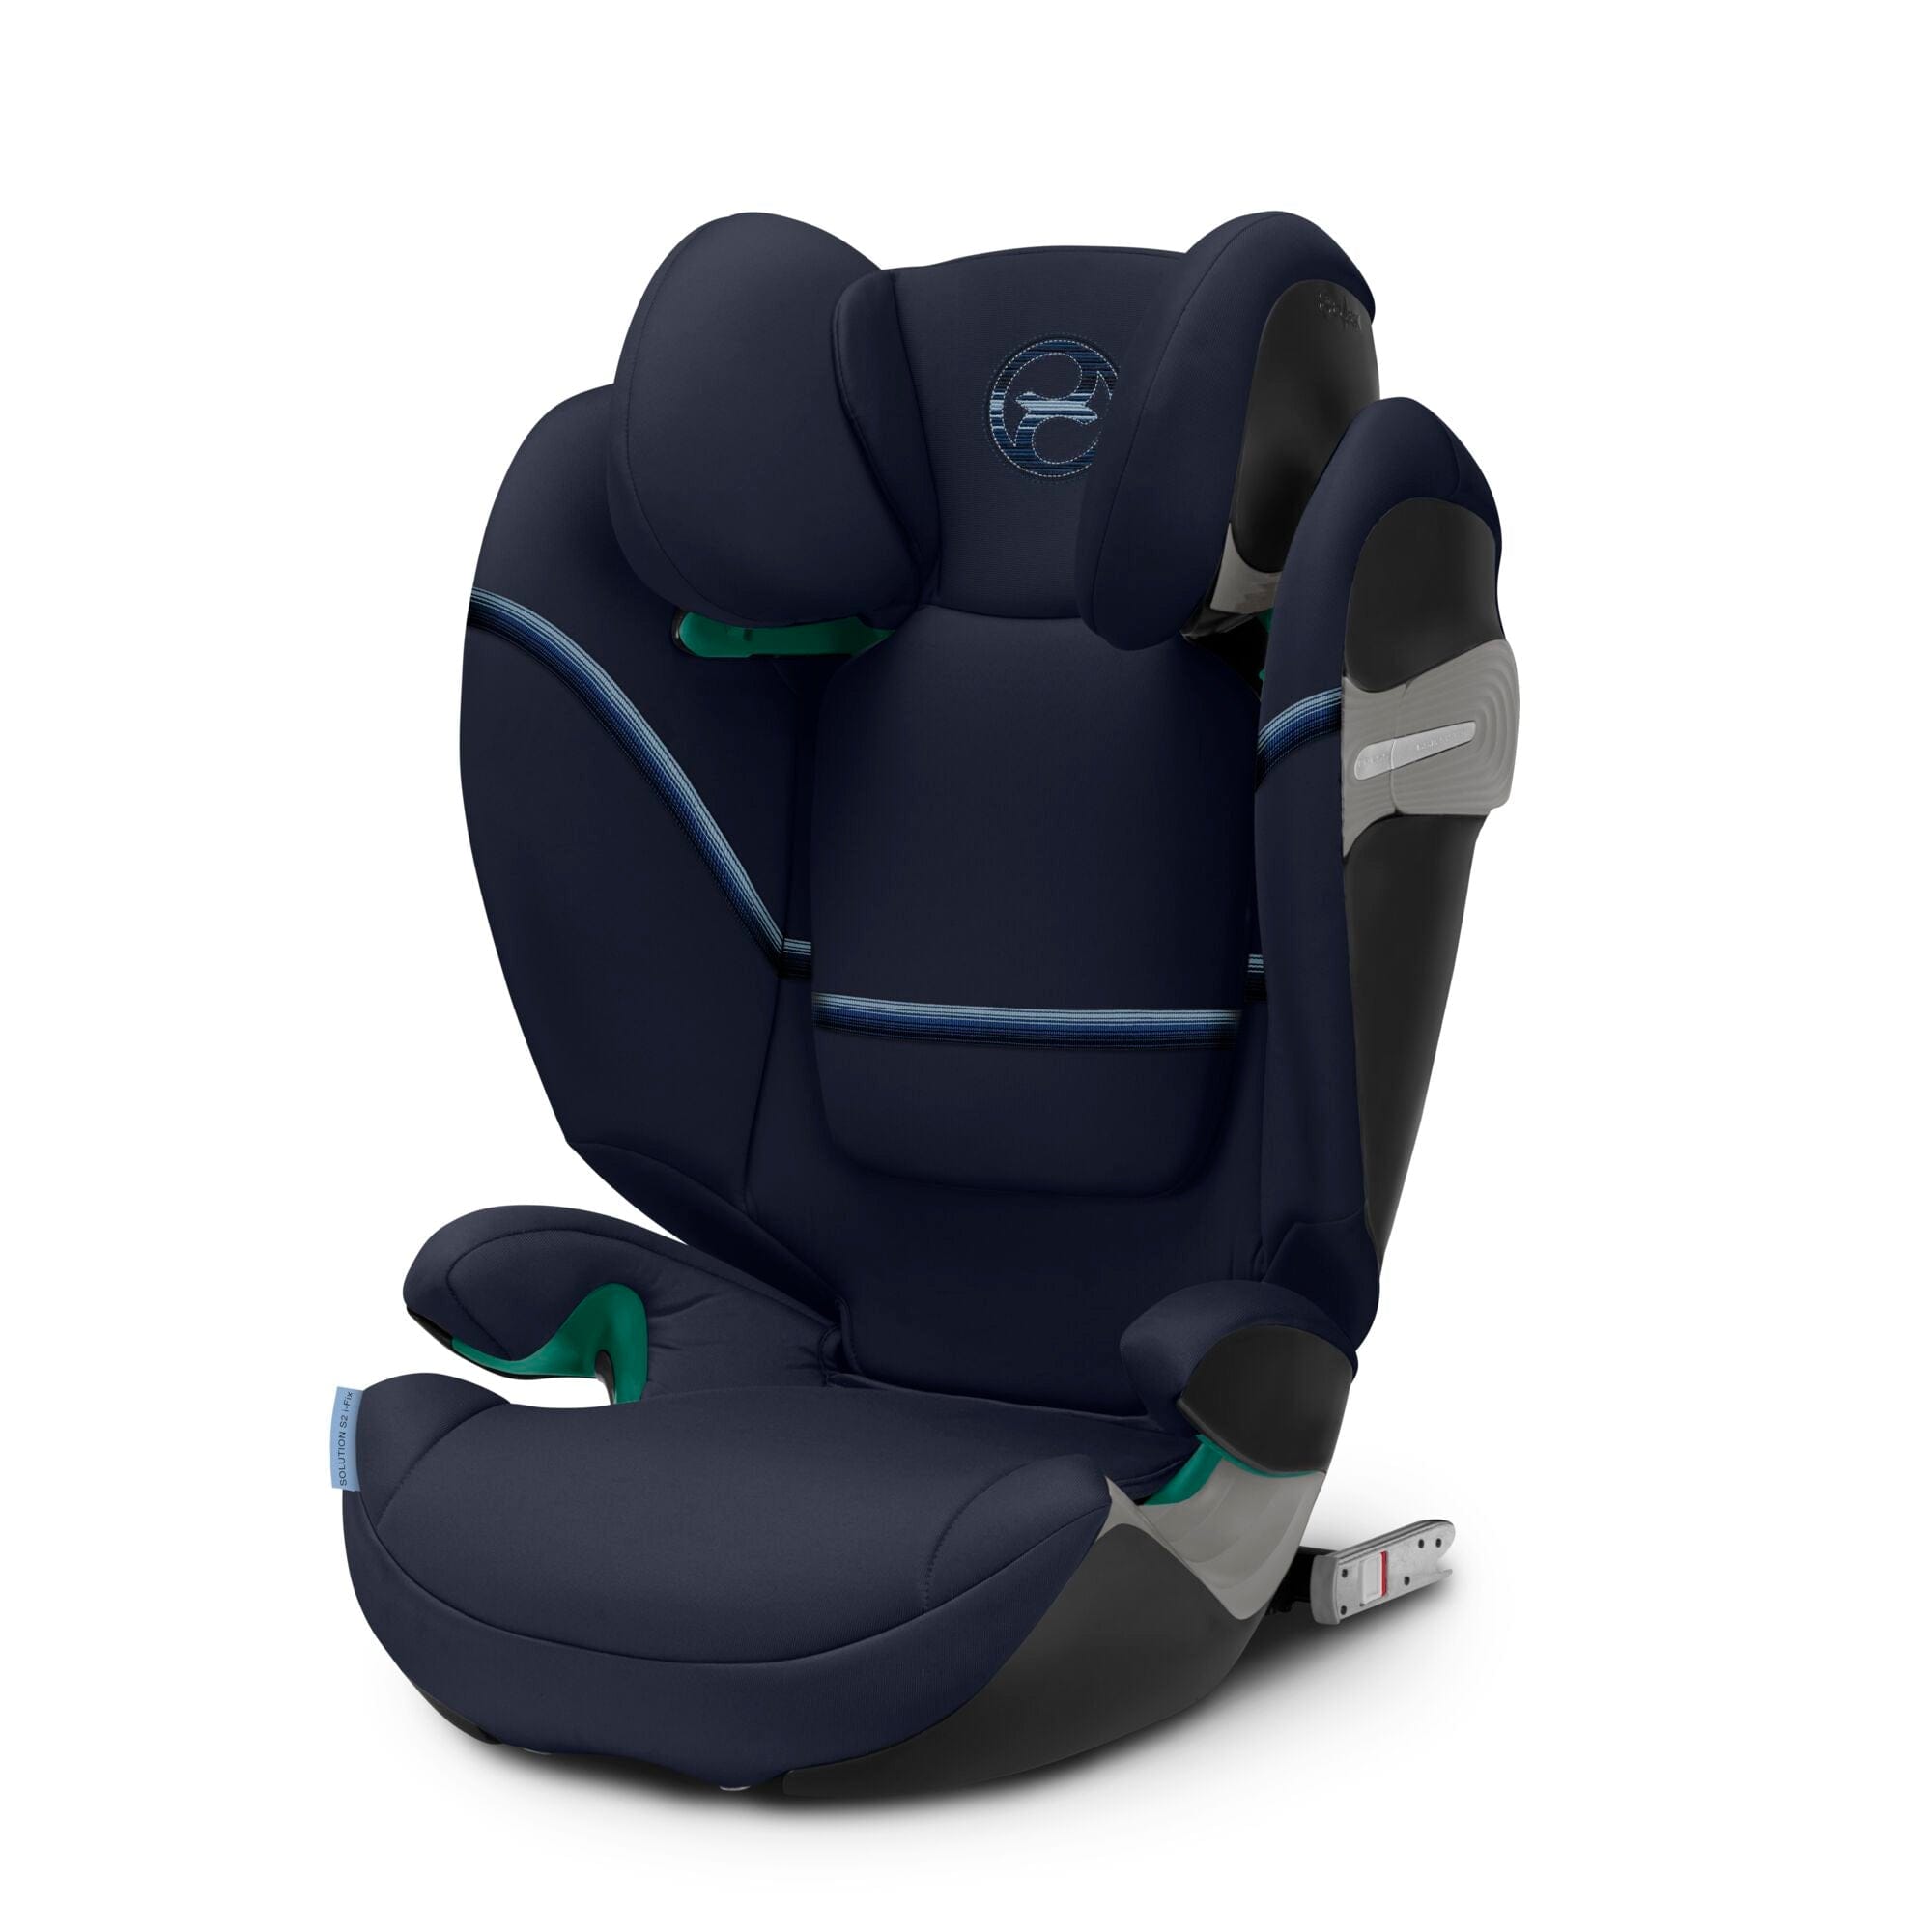 Cybex highback booster seats Cybex Solution S2 i-FIX Highback Booster Seat Ocean Blue 522002266